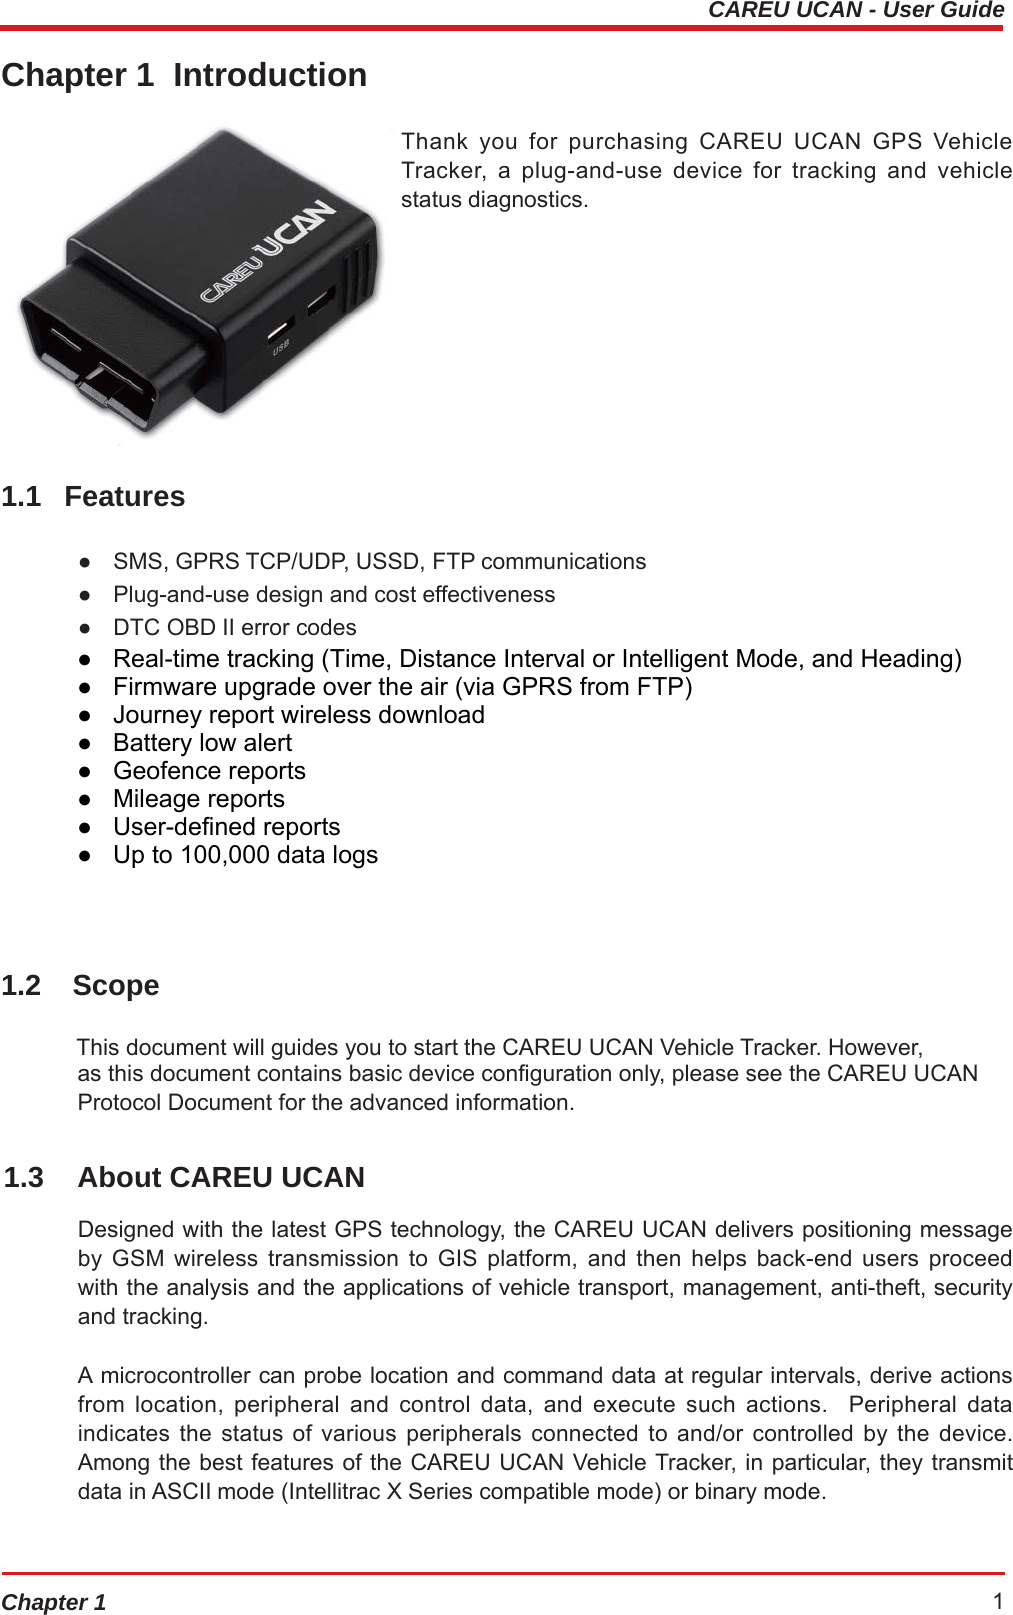 CAREU UCAN - User GuideChapter 1 1Chapter 1  Introduction  1.1 Features Thank you for purchasing CAREU UCAN GPS Vehicle Tracker, a plug-and-use device for tracking and vehicle status diagnostics. ●   SMS, GPRS TCP/UDP, USSD, FTP communications ●   Plug-and-use design and cost effectiveness ●   DTC OBD II error codes ●   GSM/GPRS simultaneously ●   Real-time tracking (Time, Distance Interval or Intelligent Mode, and Heading) ●   Firmware upgrade over the air (via GPRS from FTP) ●   Journey report wireless download ●   Battery low alert ●   Geofence reports ●   Mileage reports ●   User-defined reports ●   Up to 100,000 data logs 1.2 Scope This document will guides you to start the CAREU UCAN Vehicle Tracker. However, as this document contains basic device configuration only, please see the CAREU UCAN Protocol Document for the advanced information. 1.3  About CAREU UCAN Designed with the latest GPS technology, the CAREU UCAN delivers positioning message by GSM wireless transmission to GIS platform, and then helps back-end users proceed with the analysis and the applications of vehicle transport, management, anti-theft, security and tracking. A microcontroller can probe location and command data at regular intervals, derive actions from location, peripheral and control data, and execute such actions.  Peripheral data indicates the status of various peripherals connected to and/or controlled by the device. Among the best features of the CAREU UCAN Vehicle Tracker, in particular, they transmit data in ASCII mode (Intellitrac X Series compatible mode) or binary mode. ●   Real-time tracking (Time, Distance Interval or Intelligent Mode, and Heading) ●   Firmware upgrade over the air (via GPRS from FTP) ●   Journey report wireless download ●   Battery low alert ●   Geofence reports ●   Mileage reports ●   User-defined reports ●   Up to 100,000 data logs